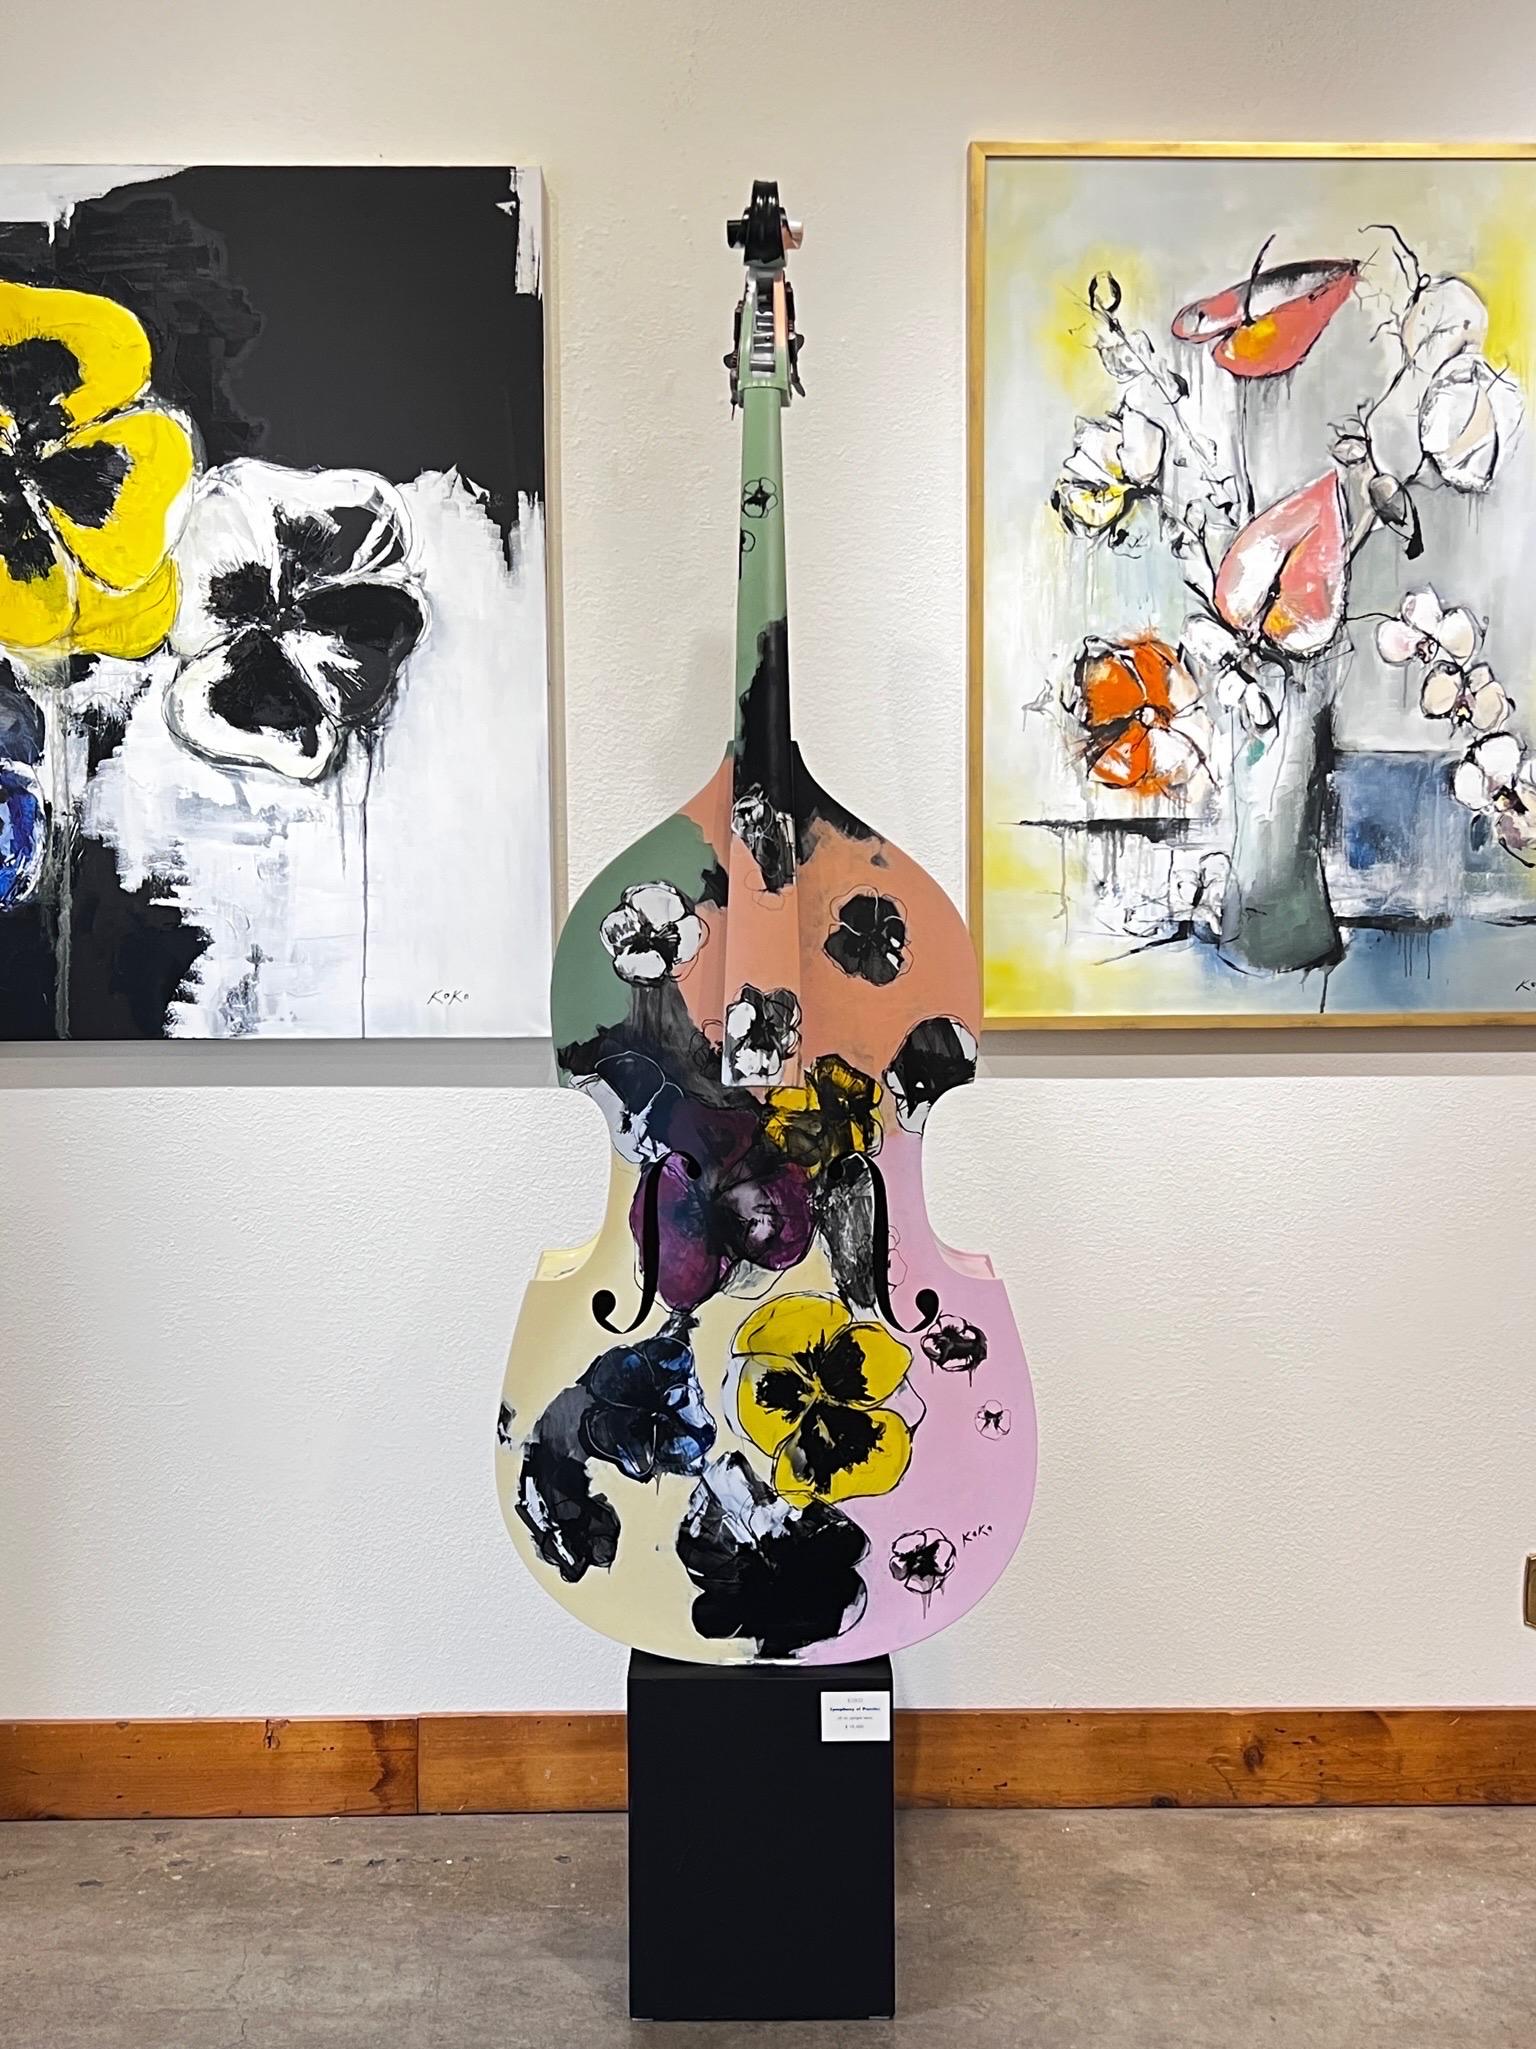 Abstract Symphony of Pansies,  Pansies art, oil on upright bass. 